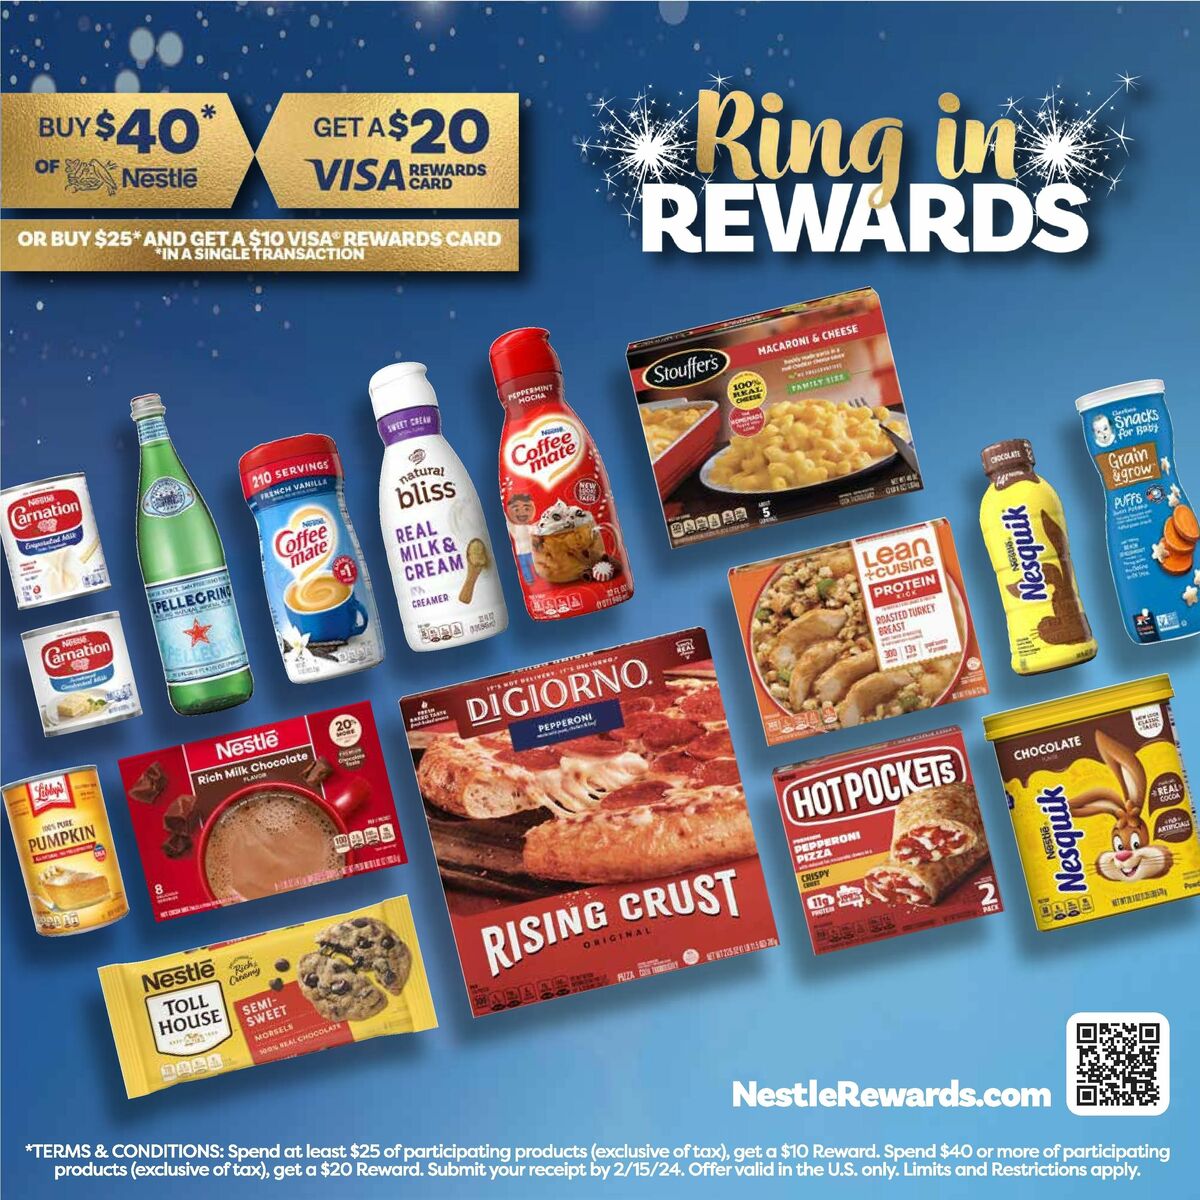 Fareway Weekly Ad from January 15